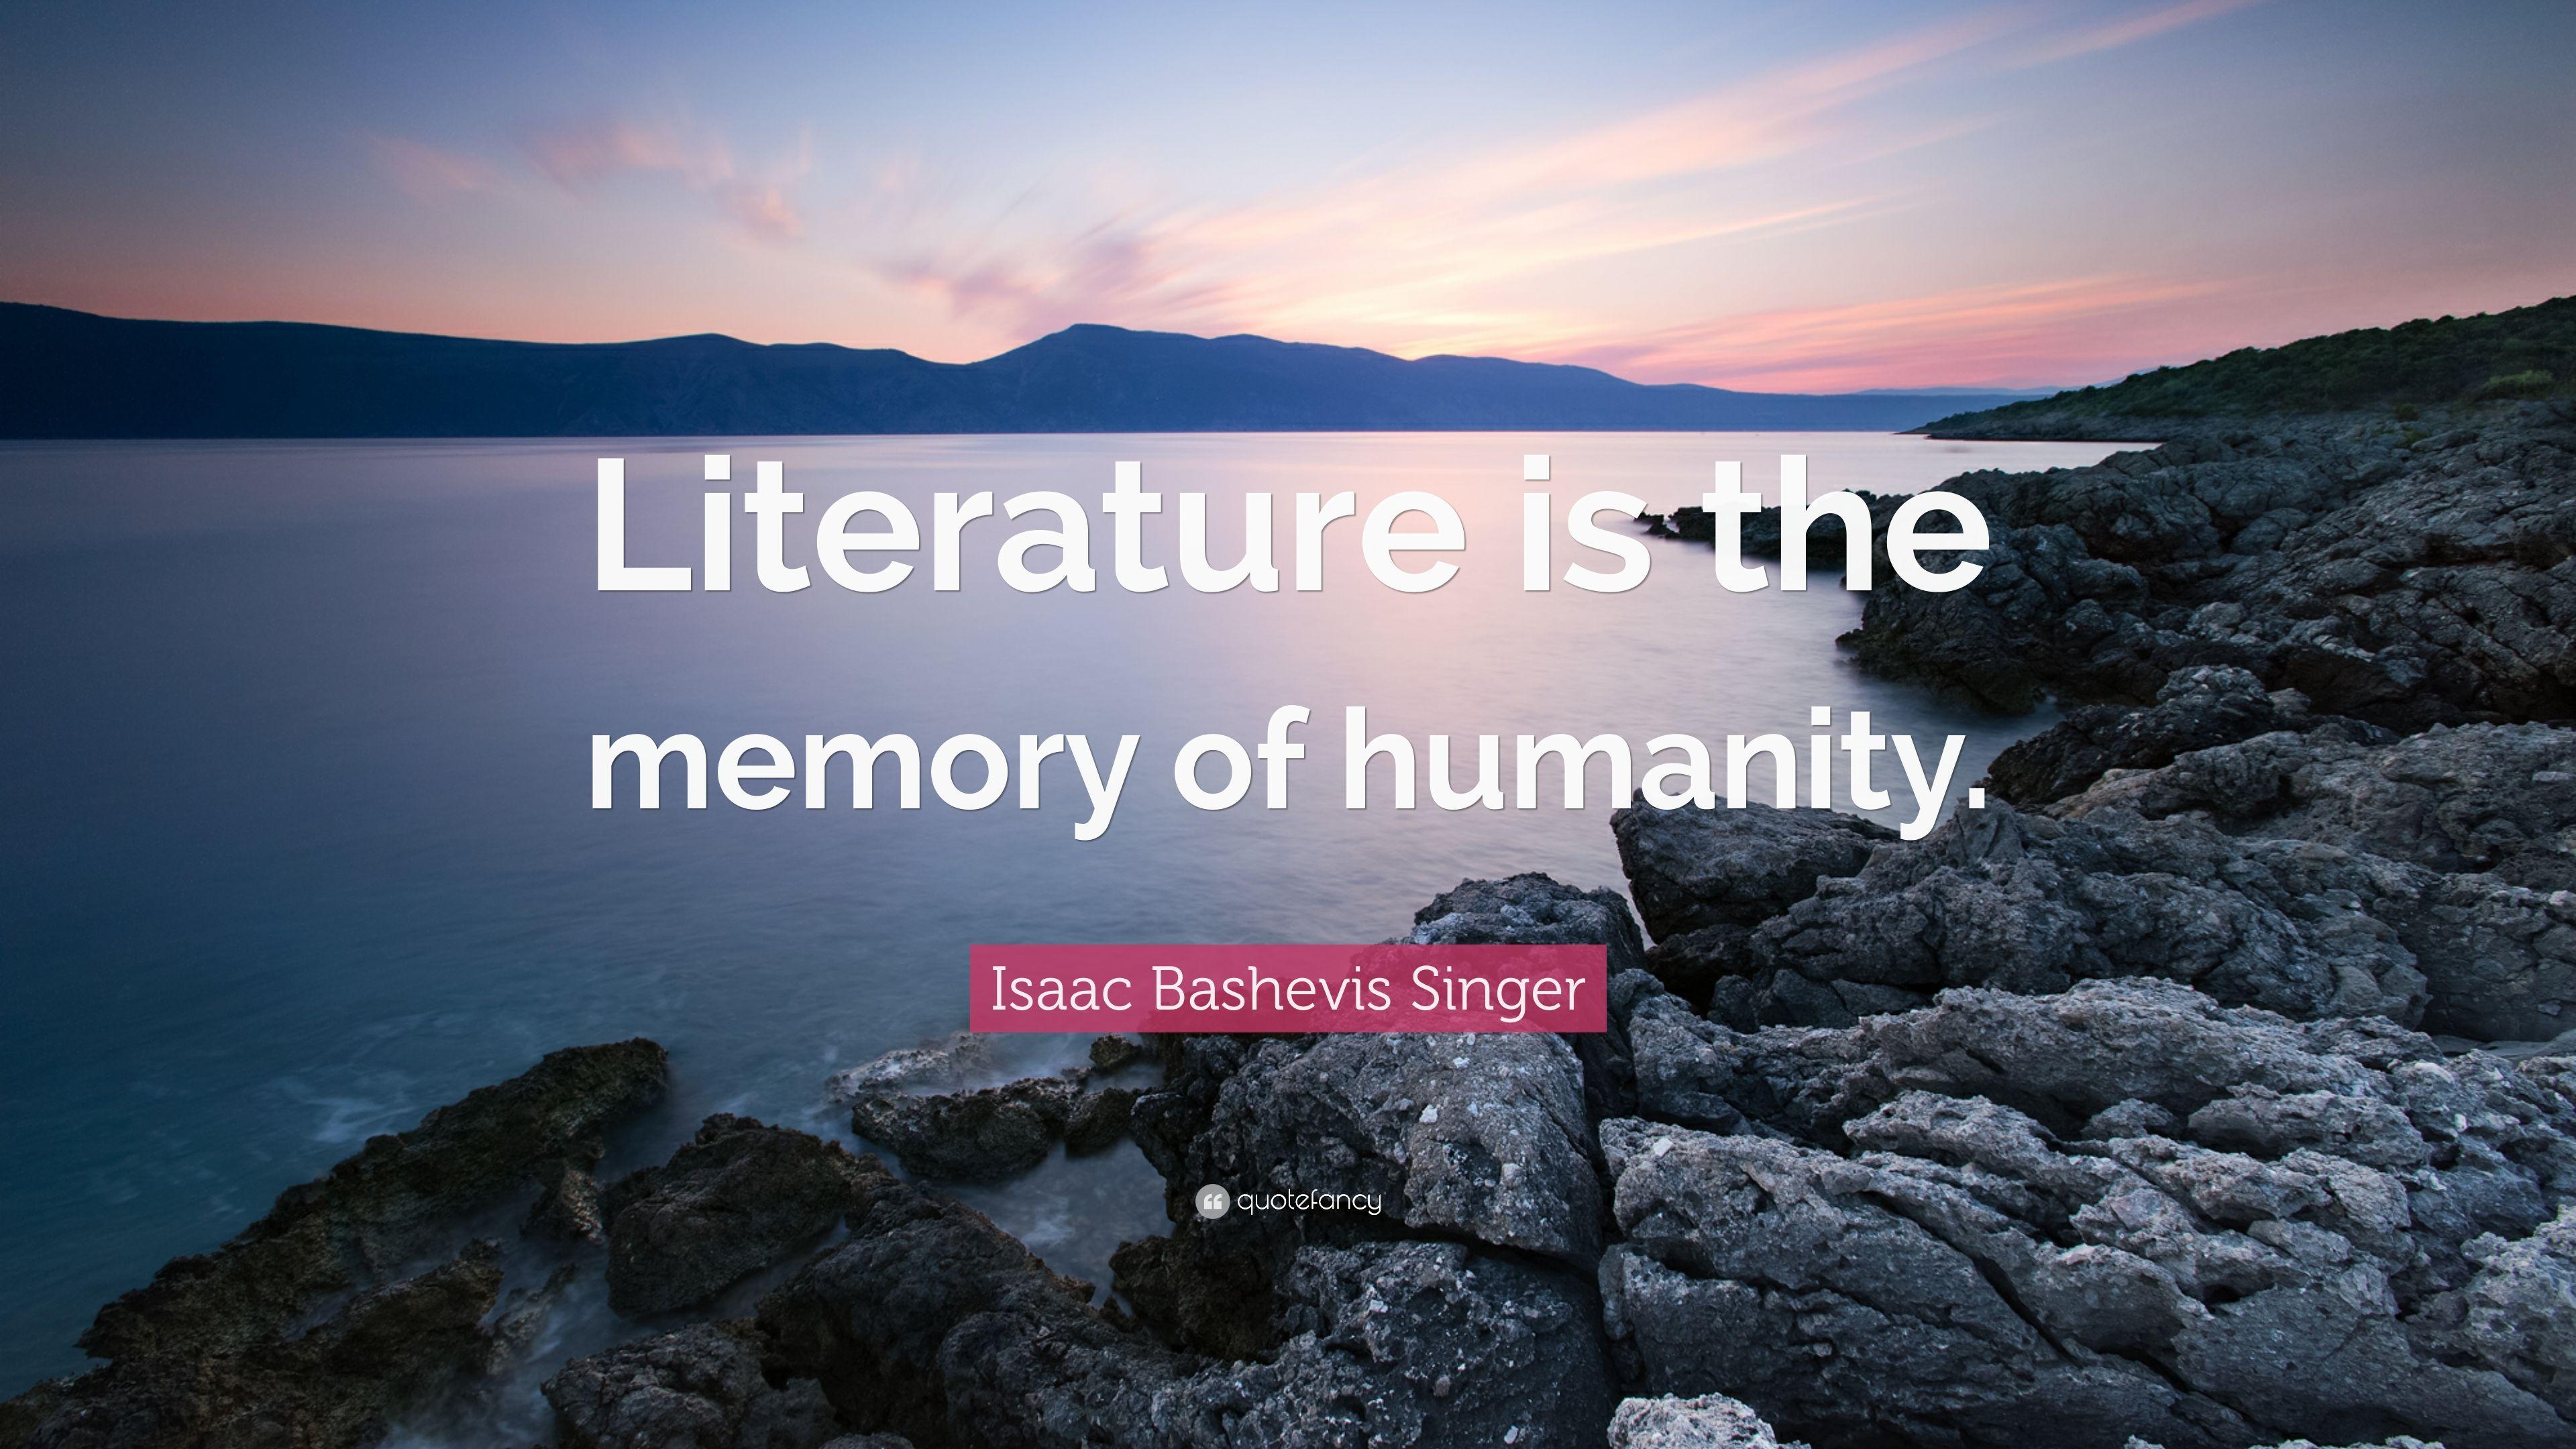 Isaac Bashevis Singer Quote: “Literature is the memory of humanity